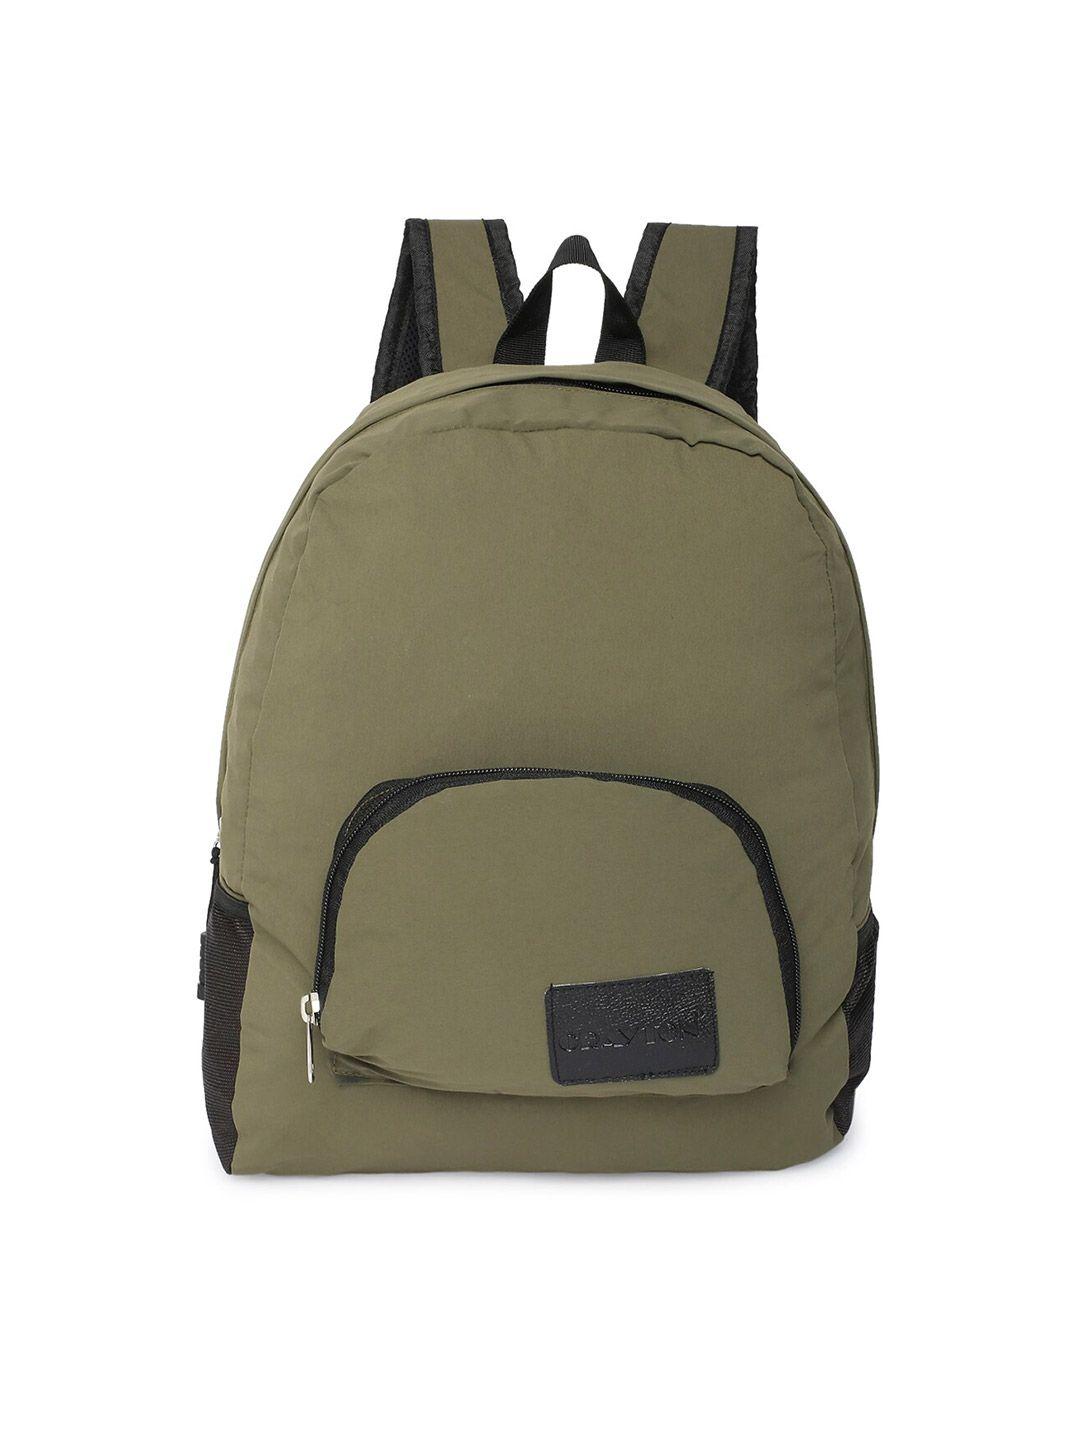 crayton unisex backpack with compression straps